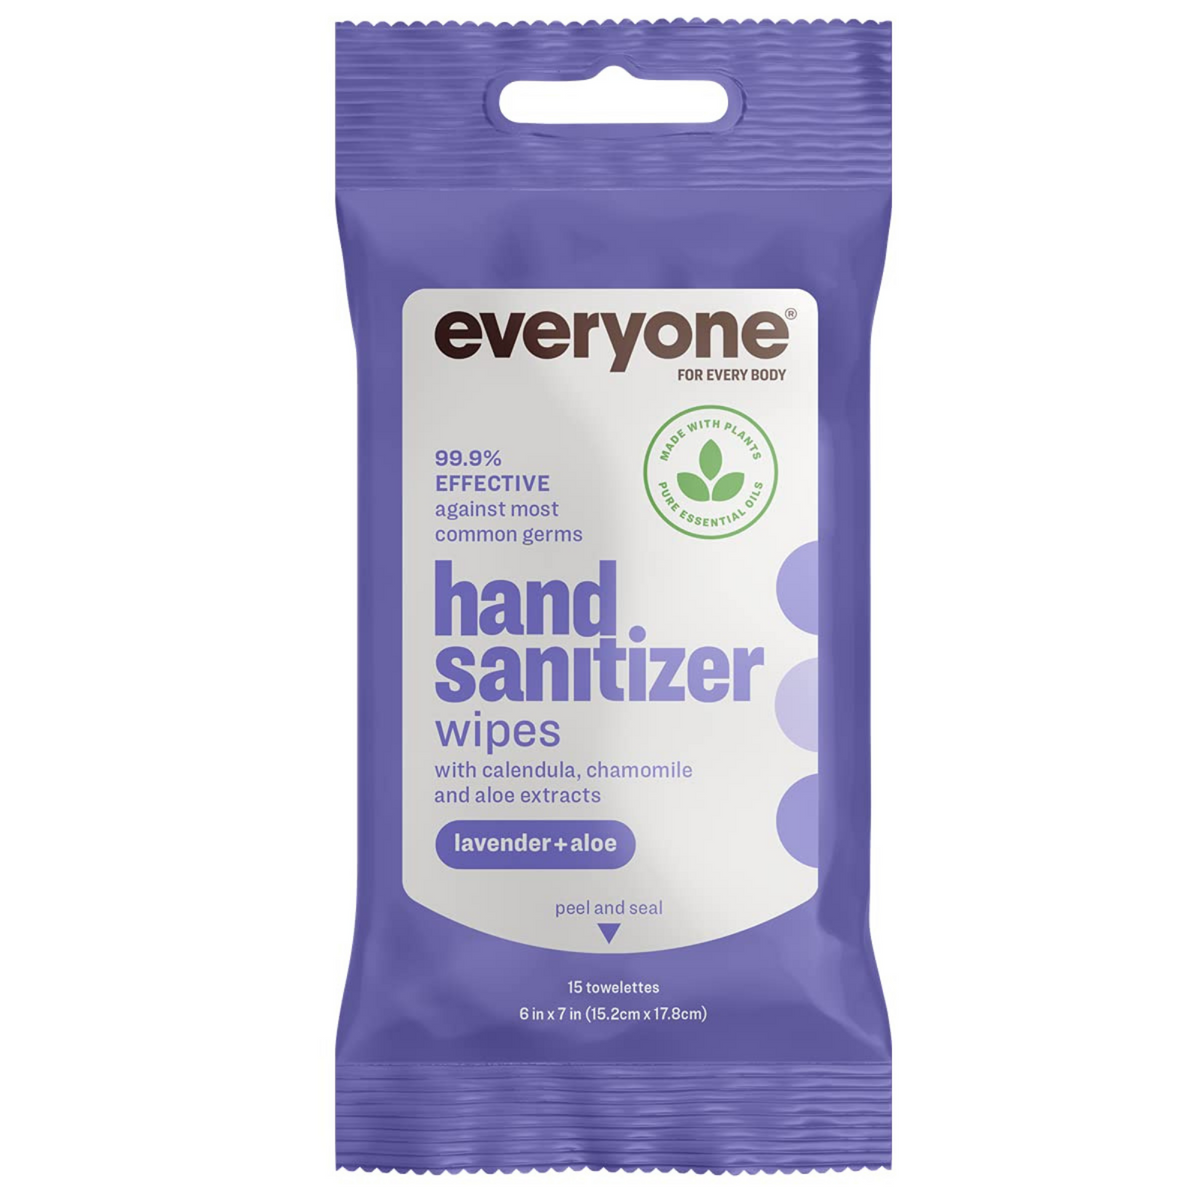 Primary Image of Lavender and Aloe Hand Sanitizer Wipes